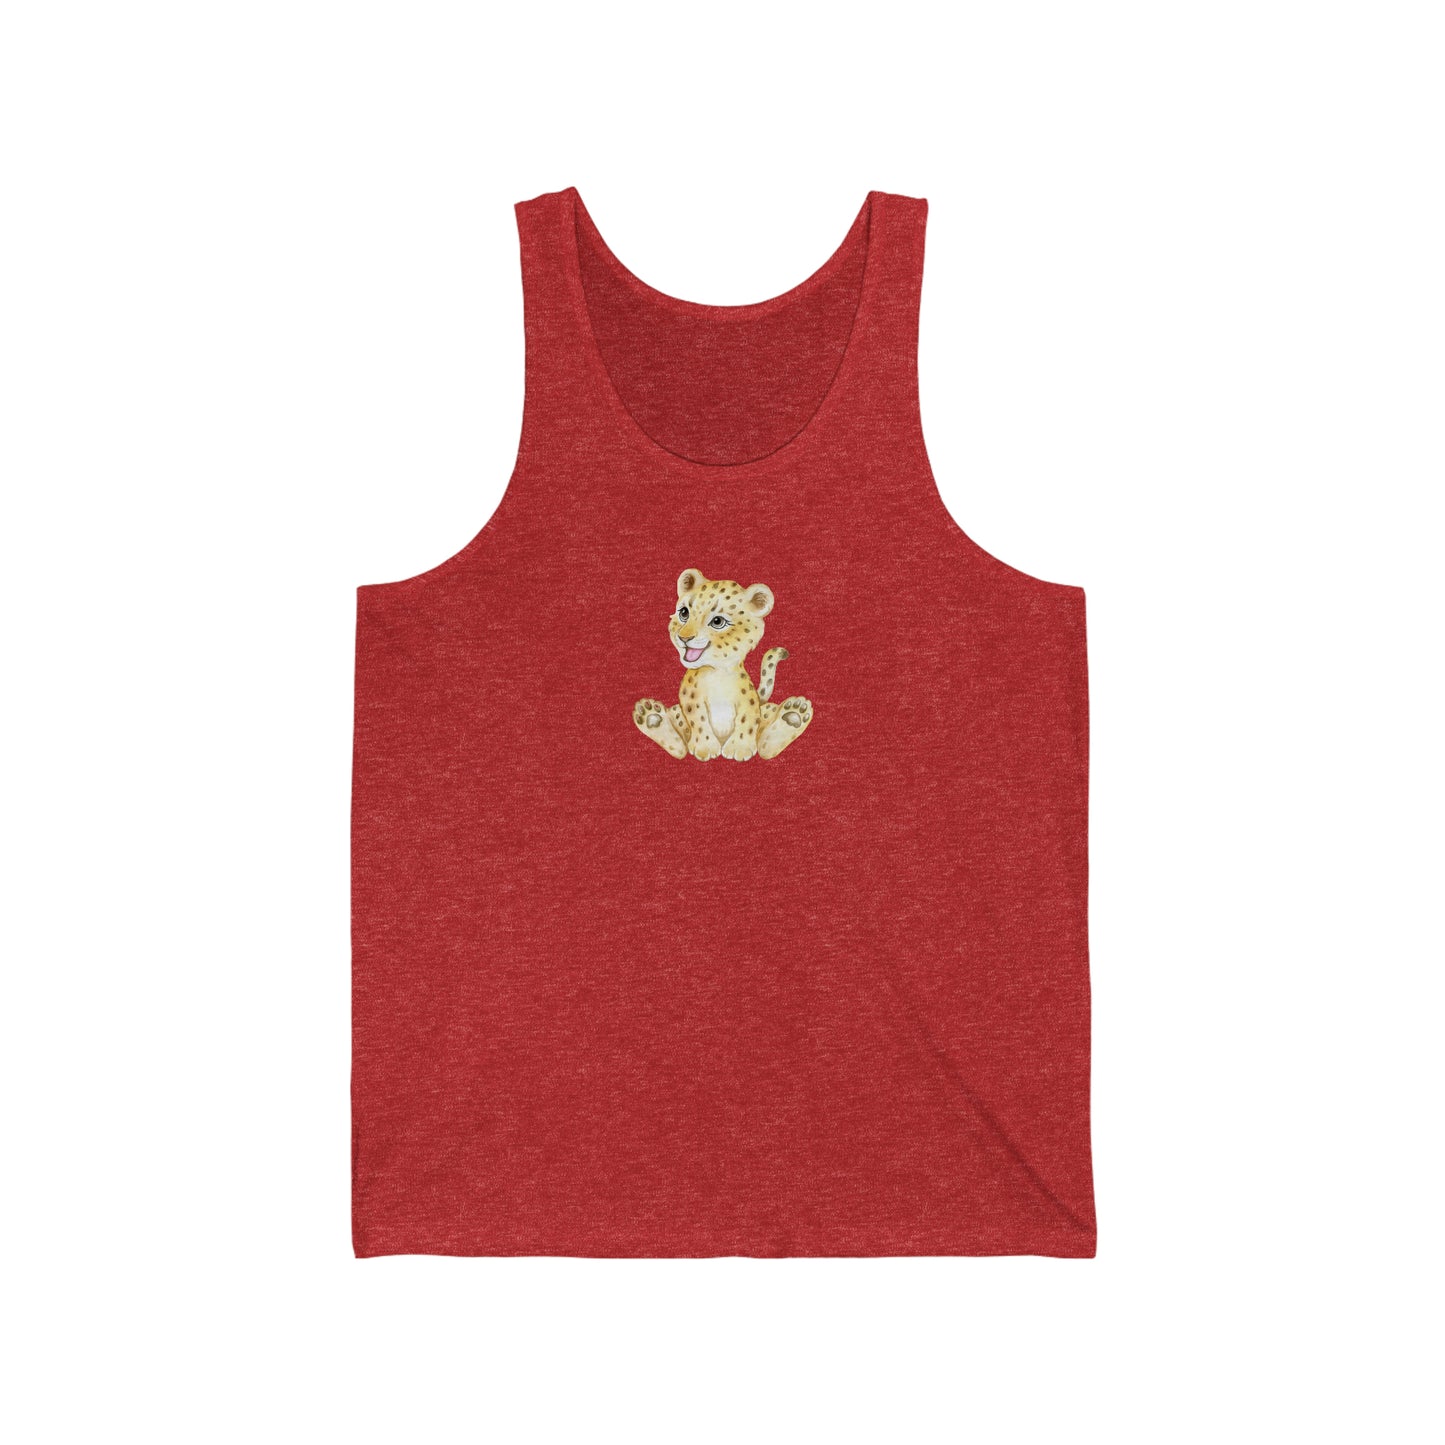 ‘Baby lion’ Printed Front & Back.  Unisex Jersey Tank